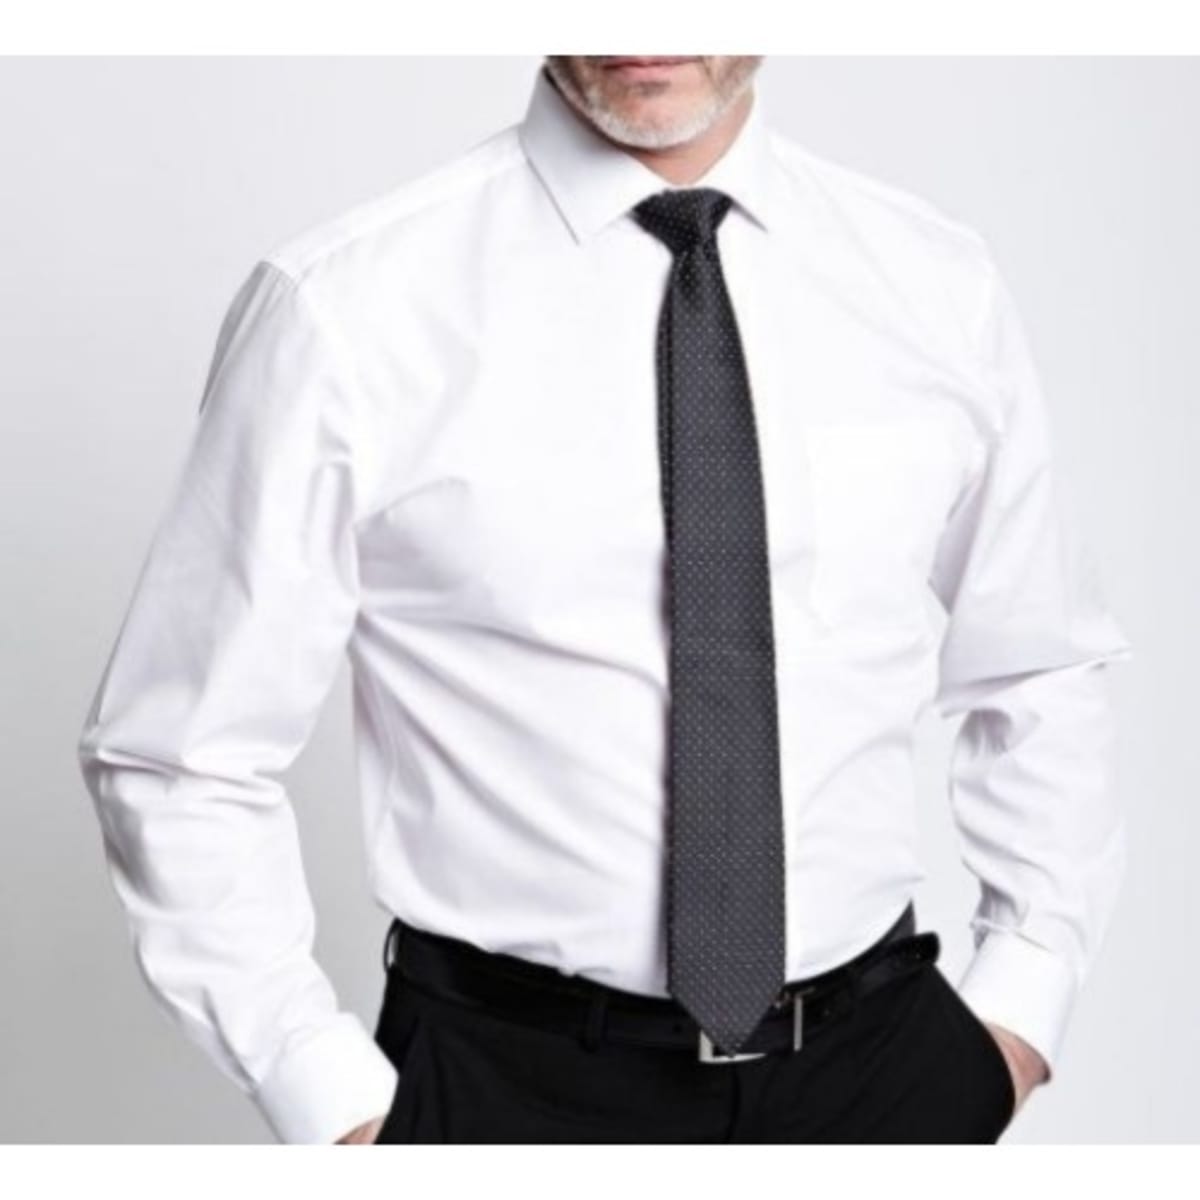 Cheerful Employee Man In White Shirt With Black Tie Keeping Hands In  Pockets And Smiling While Standing Isolated Grey Studio Background Stock  Photo - Download Image Now - iStock